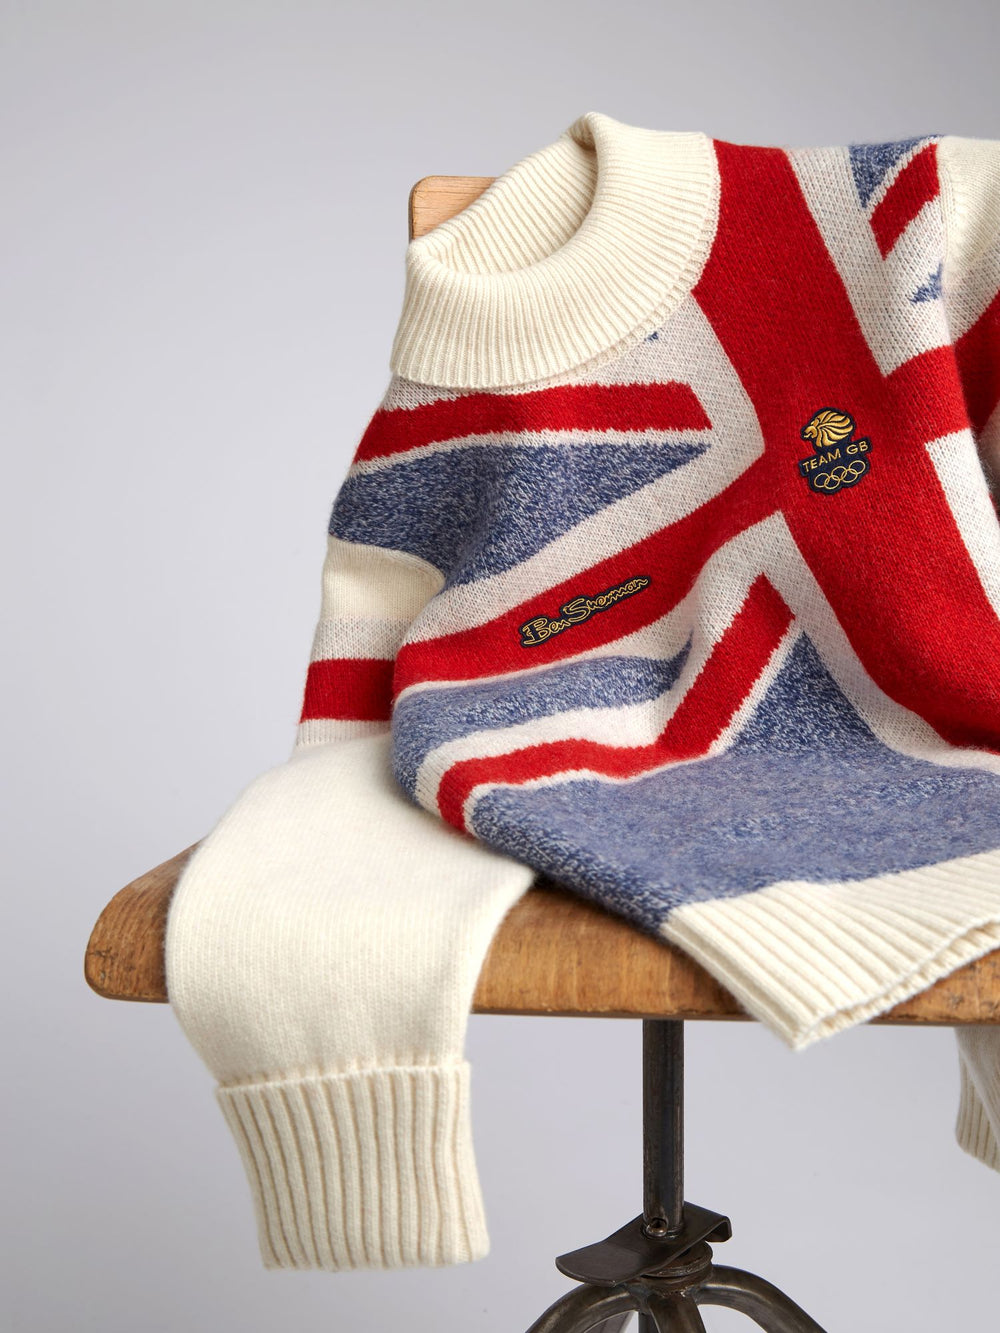 Team GB, Ben Sherman sweater, knitwear, Official 2022 Winter Olympics, Limited Edition Great Britain sweater, Beijing, GB flag, cream, on chair